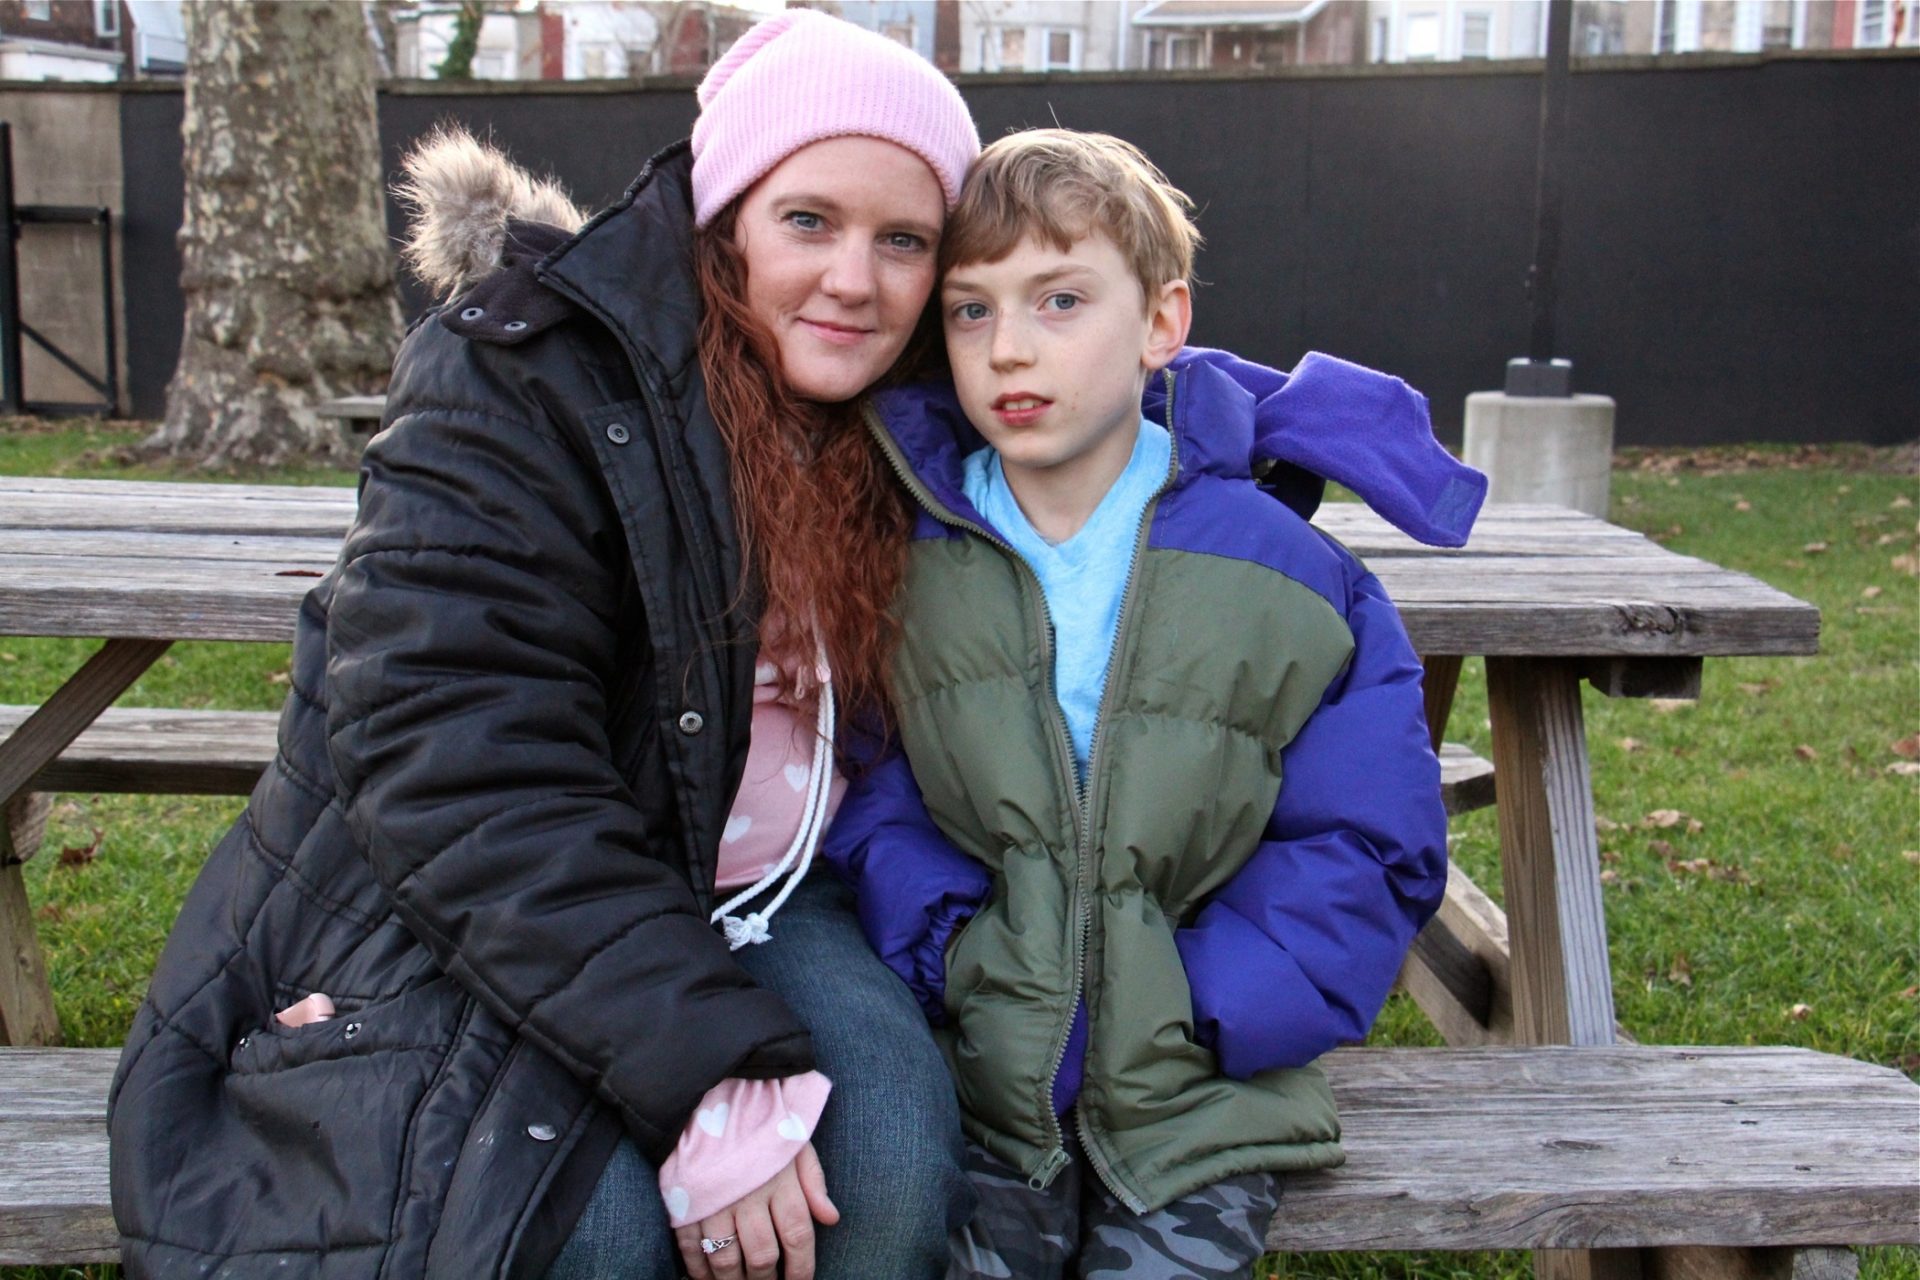 Susann Schofield, 39, and her son Brice, 11, will be affected by the USDA's proposal to reduce SNAP benefits